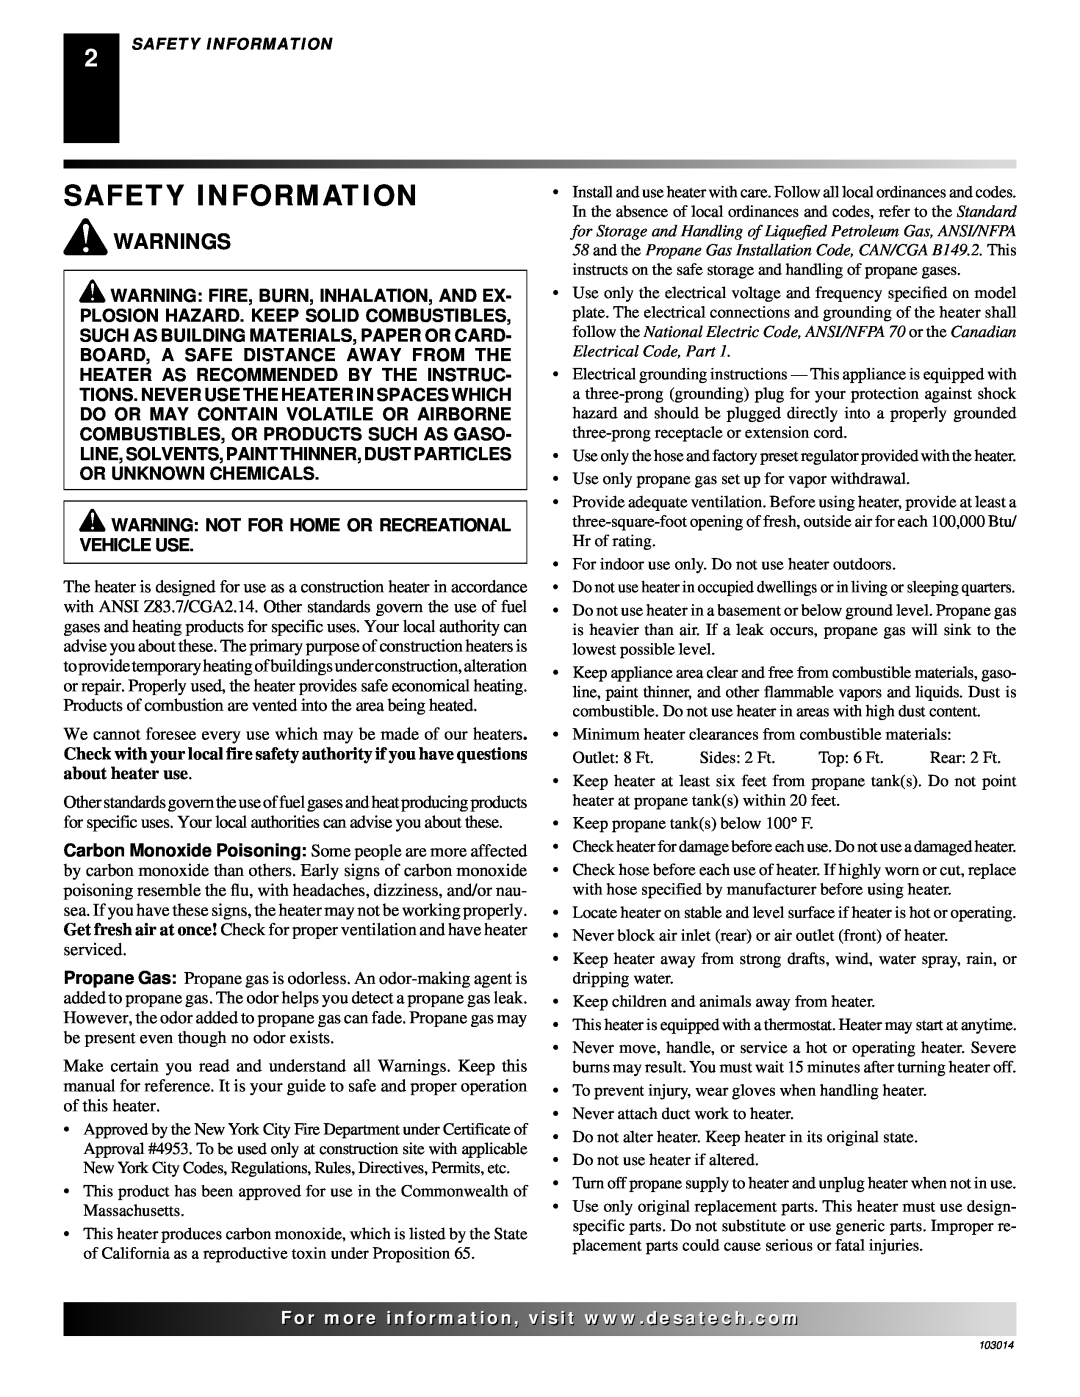 Desa LP155AT owner manual Safety Information, Warnings, Warning Not For Home Or Recreational Vehicle Use 